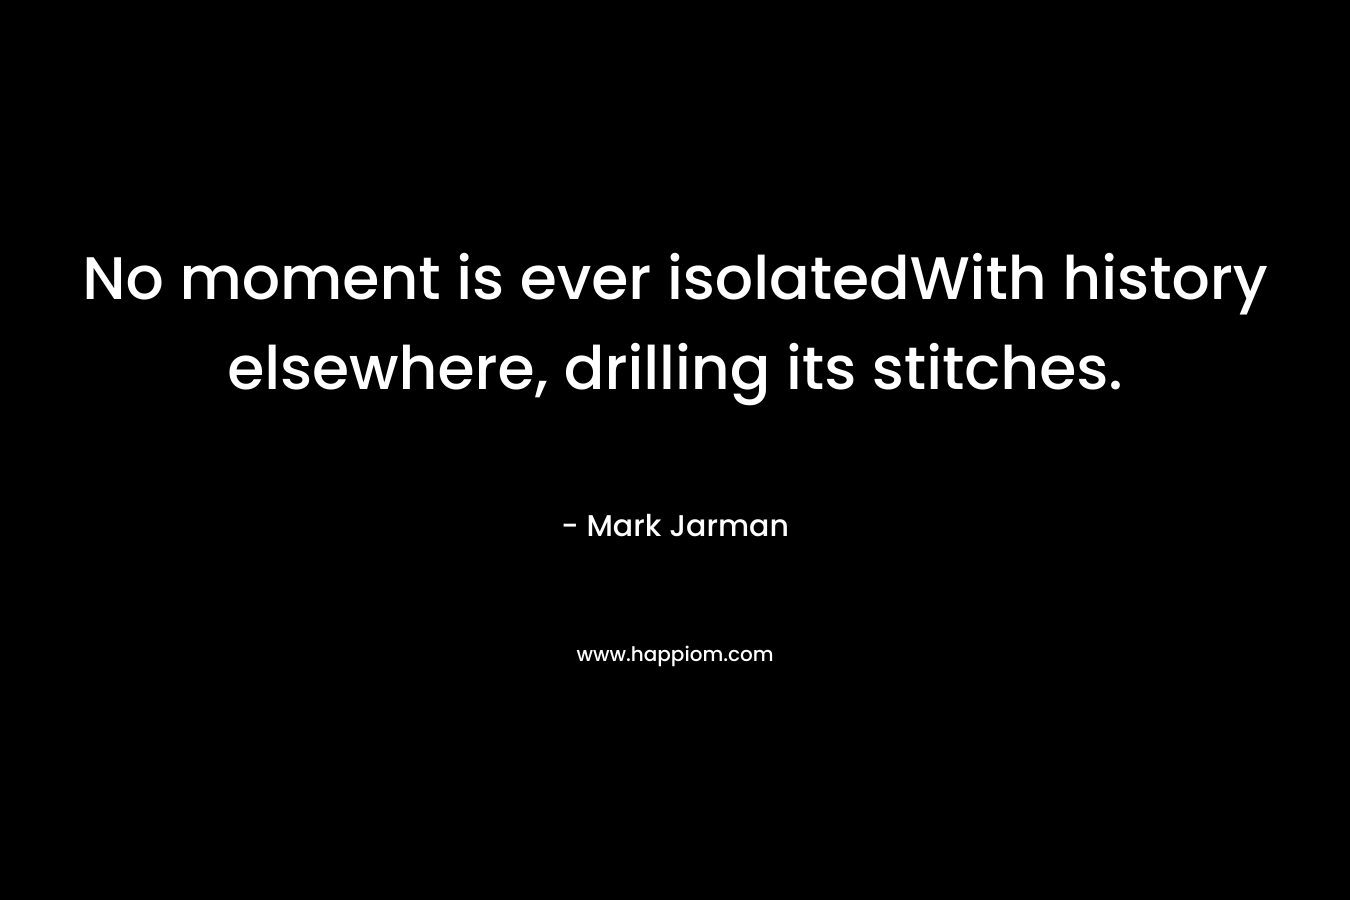 No moment is ever isolatedWith history elsewhere, drilling its stitches. – Mark Jarman